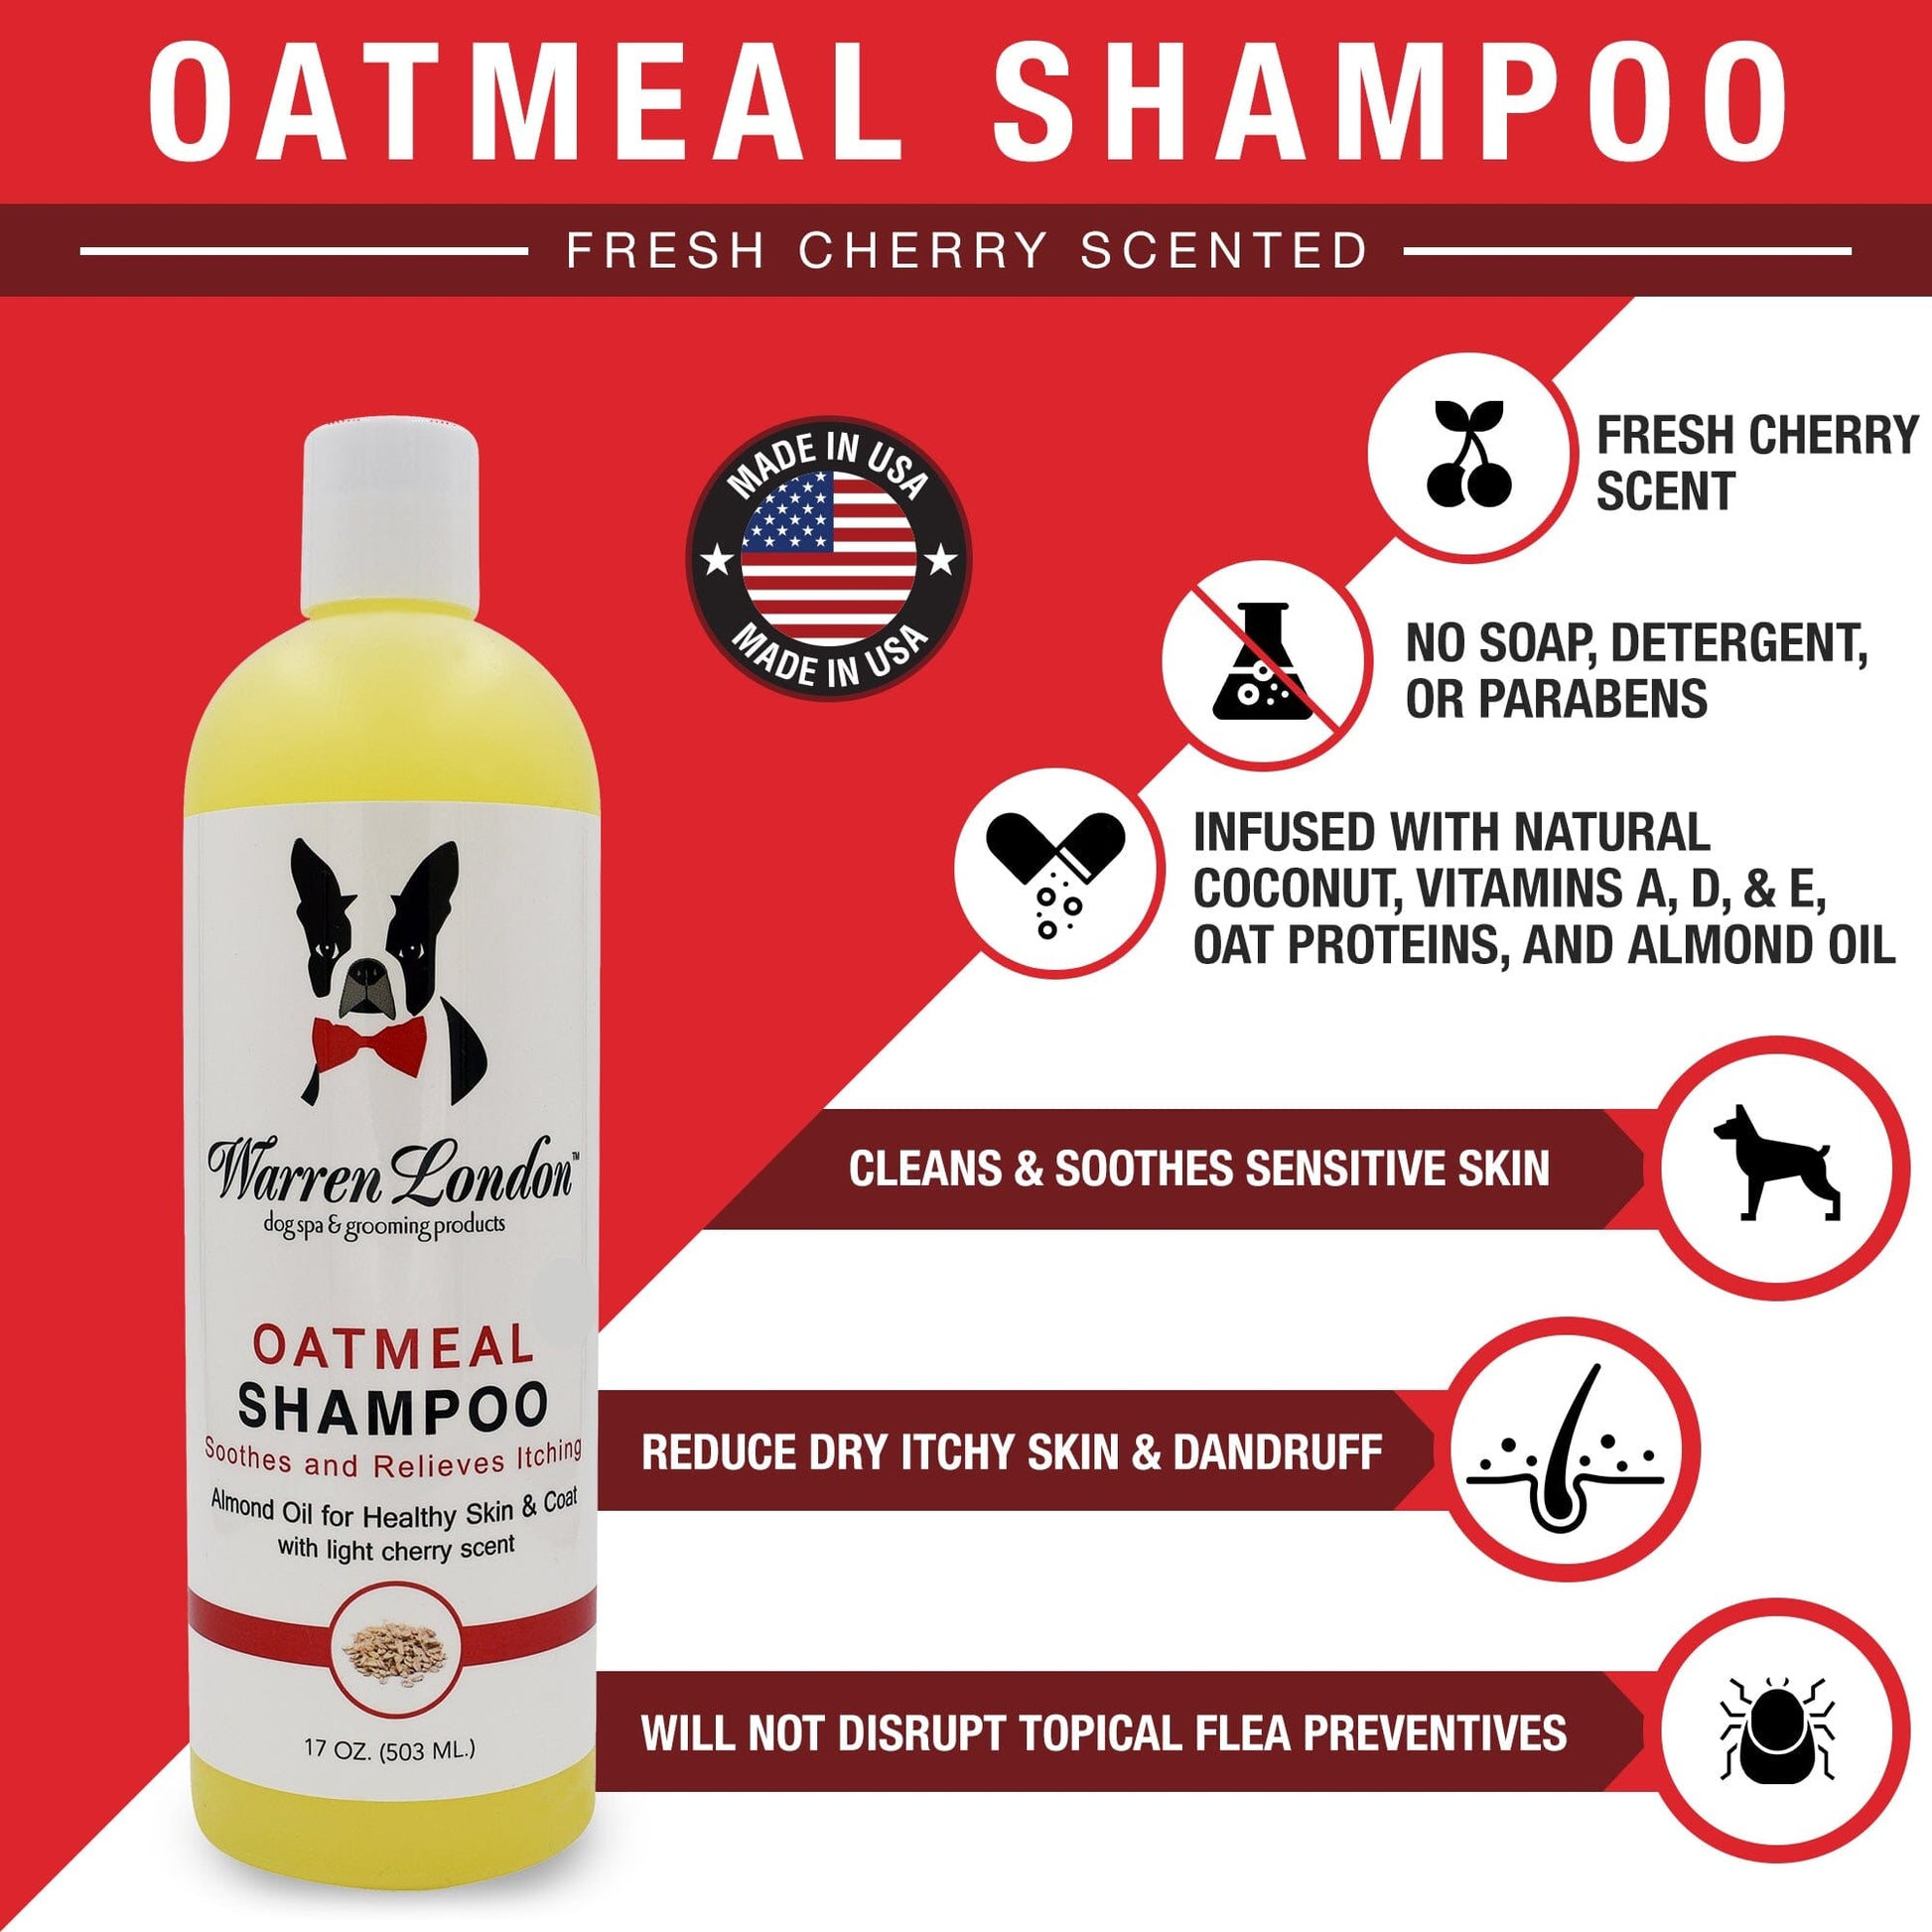 Oatmeal Shampoo - Cherry Scented - Professional Size Grooming Size Product Warren London 